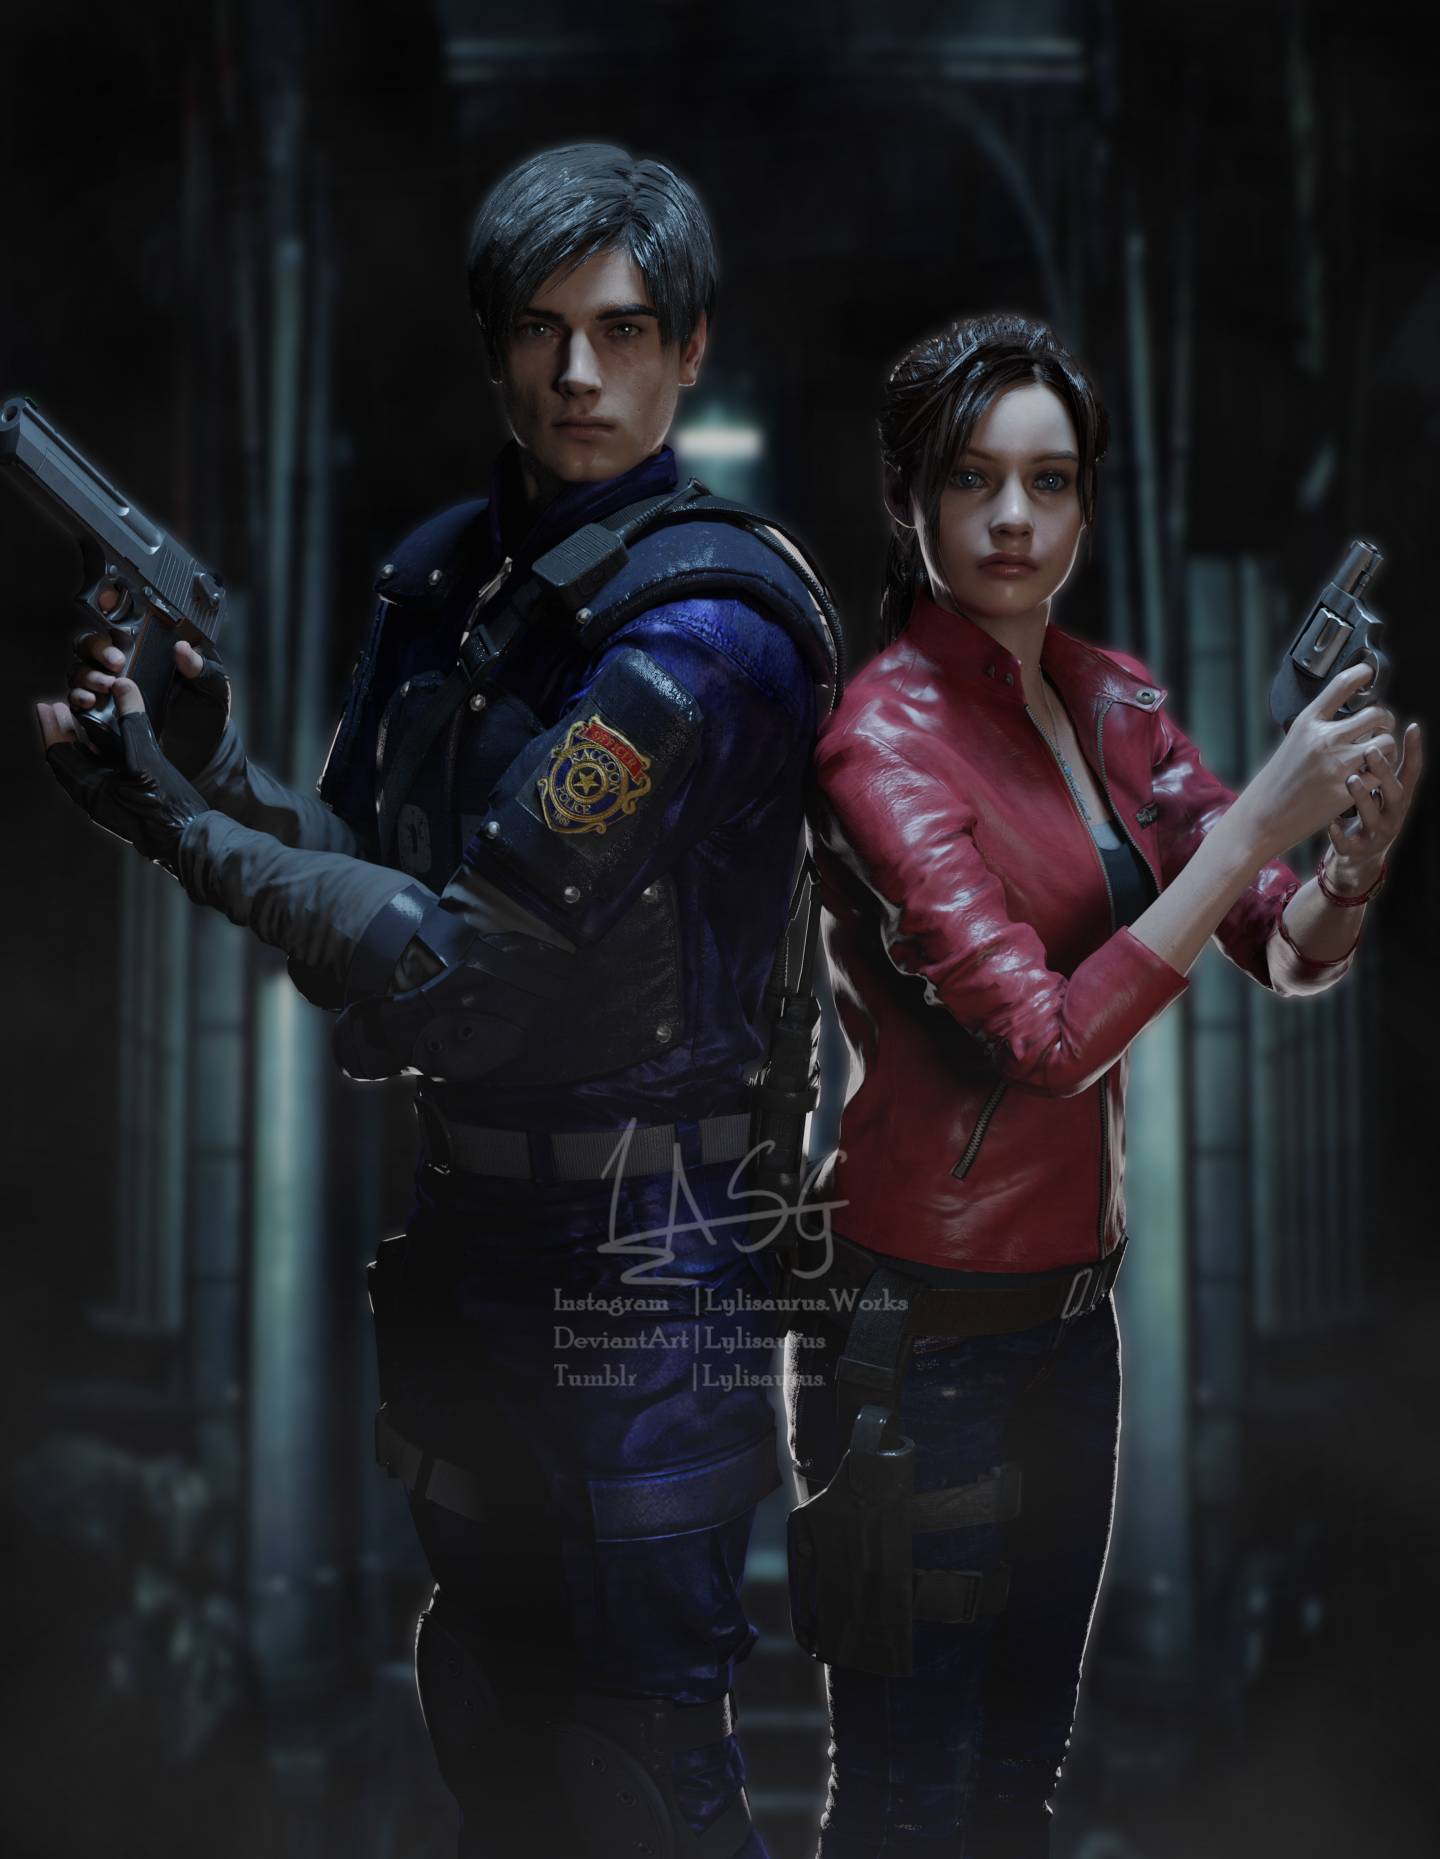 leon s. kennedy, claire redfield, and mr. x (resident evil and 3 more)  drawn by wenny02